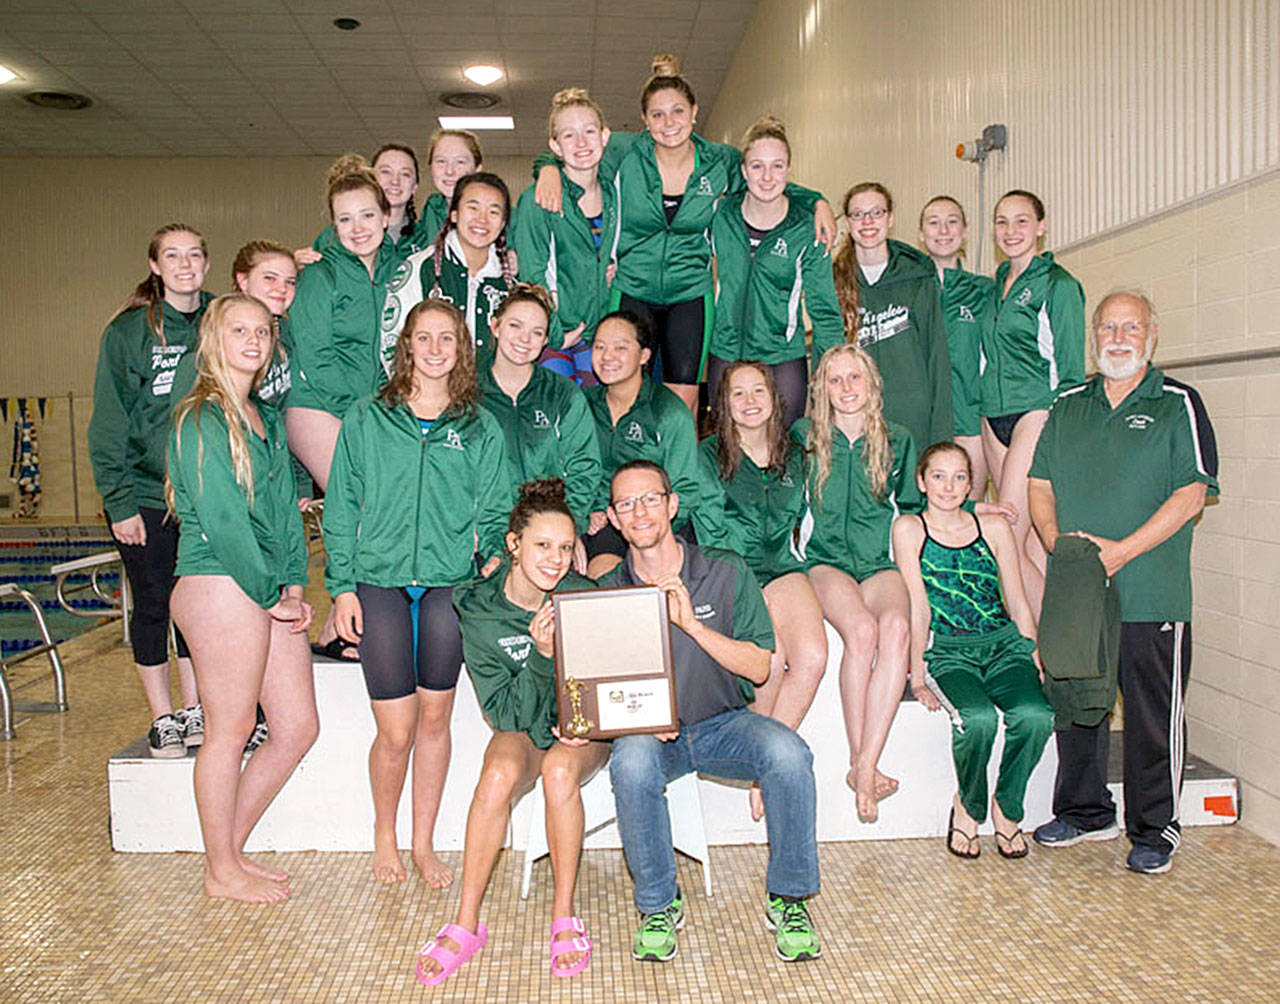 The Port Angeles girls swim team after winning the West Central District III 2A/1A championship Saturday. The girls now move to the state 2A swim meet beginning Friday in Federal Way. From left, rear are Cassii Middlestead, Lily Robertson, Jane Rudzinski, Kiara Amundson, Taylor Beebe, Lum Fu, Emma Murray, Kenzie Johnson, Nadia Cole, Emma Weller, Ginnie Litle and Brianna Tiemersma. From left, front are Ashlee Seelye, Erin Edwards, Sierra Hunter, Felicia Che, Kiara Schmitt, Tana Hiigel, Adriana McClain and coach Pete VanRossen. From left, front, are Maggie Martin and head coach Rich Butler. (Patti Reifenstahl)